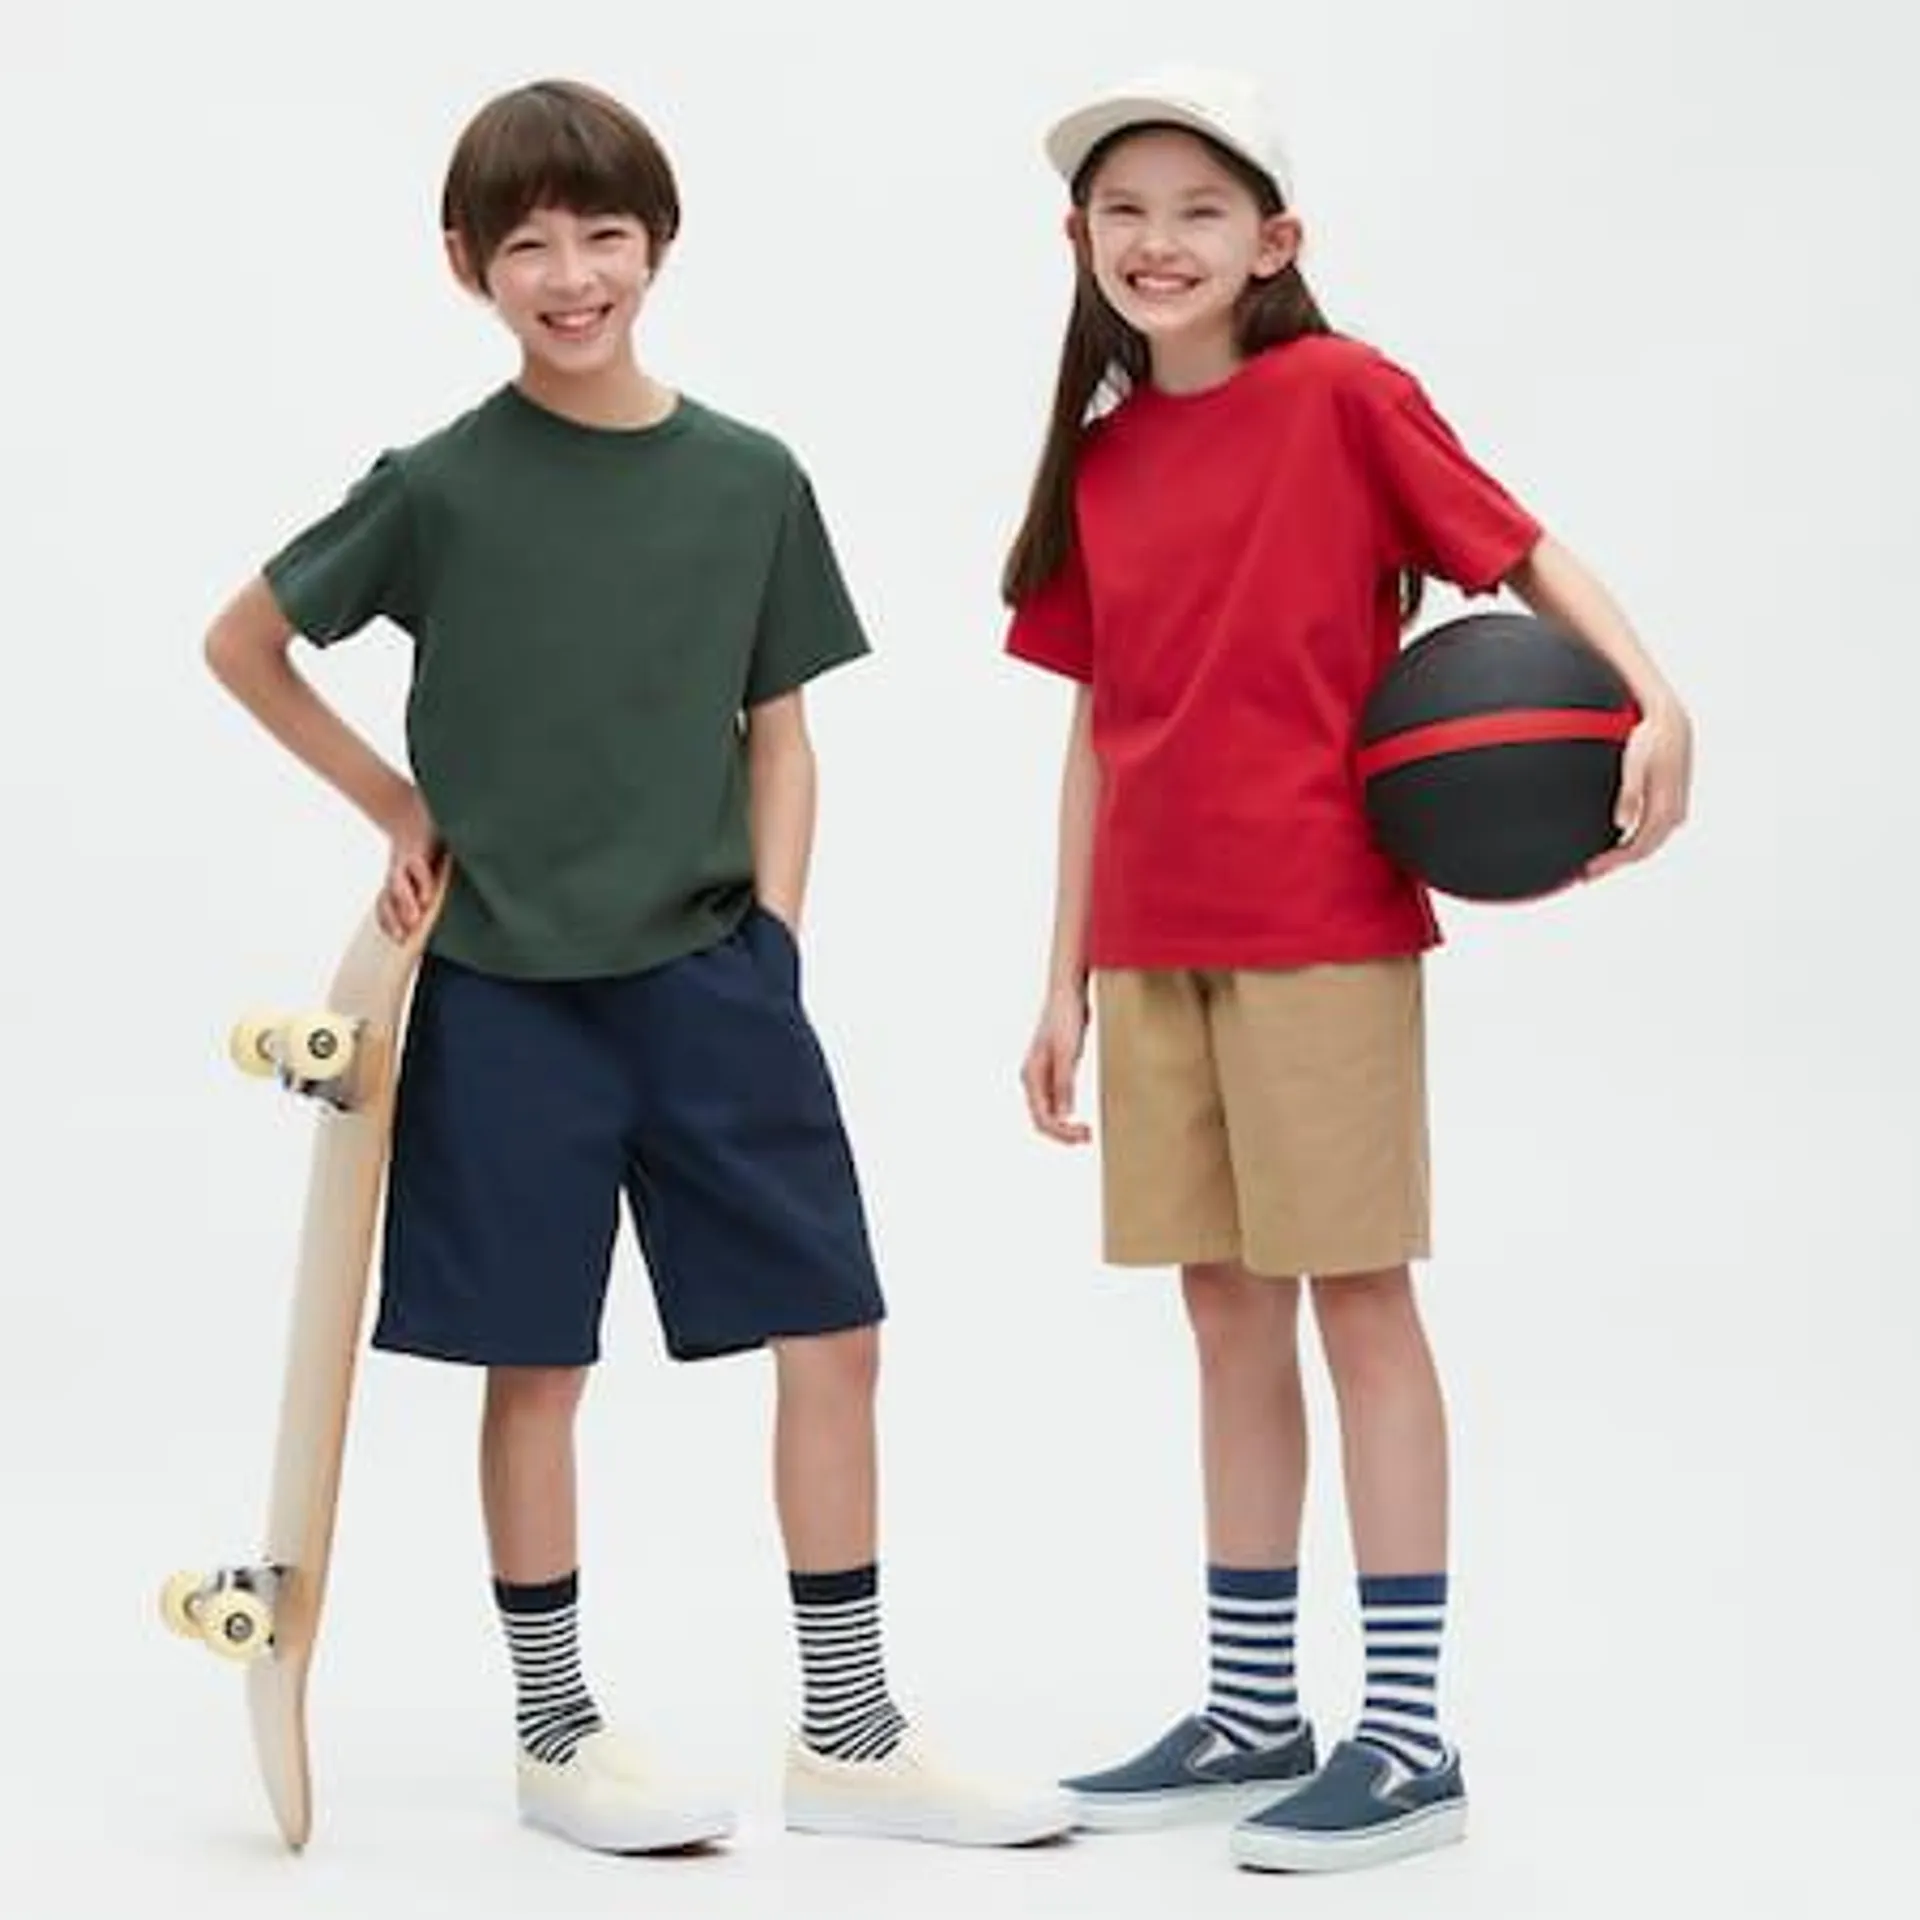 Kids Cotton Twill Easy Shorts